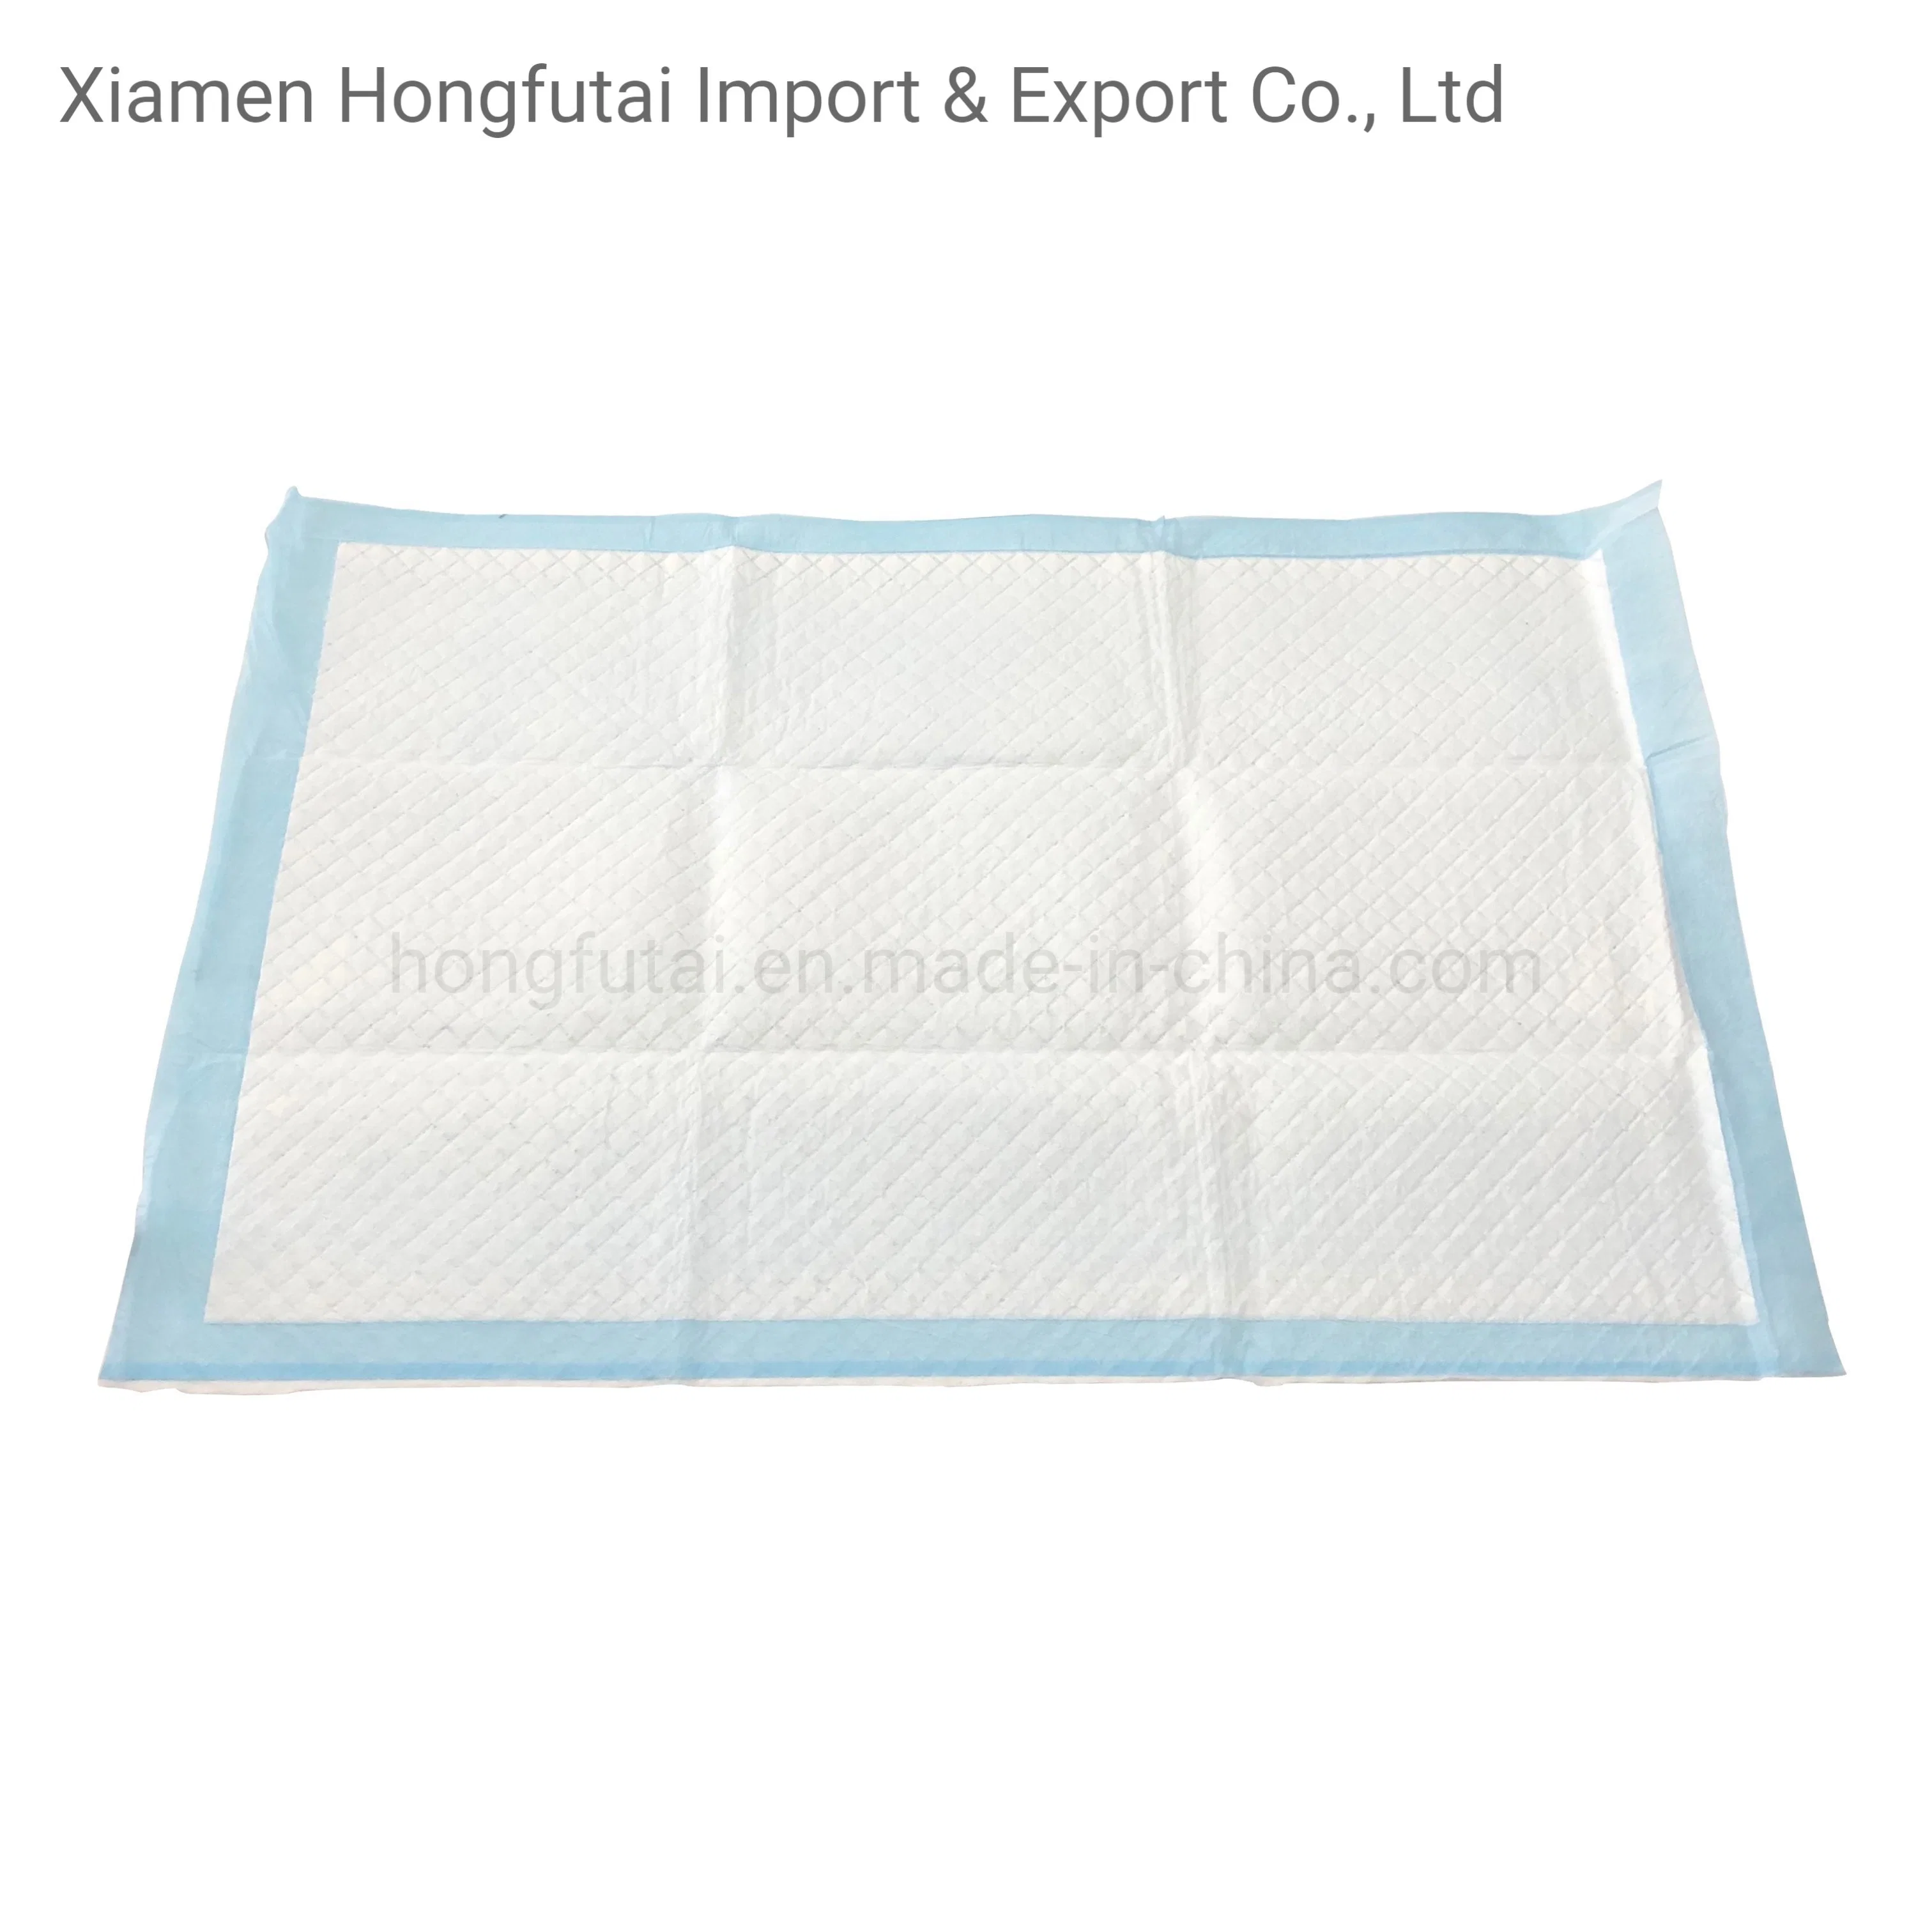 Wholesale/Supplier Super Absorbent Disposable Inconvenient Hygiene Underpad Sheet Under Baby Care Bed Pad Manufacturer for Women